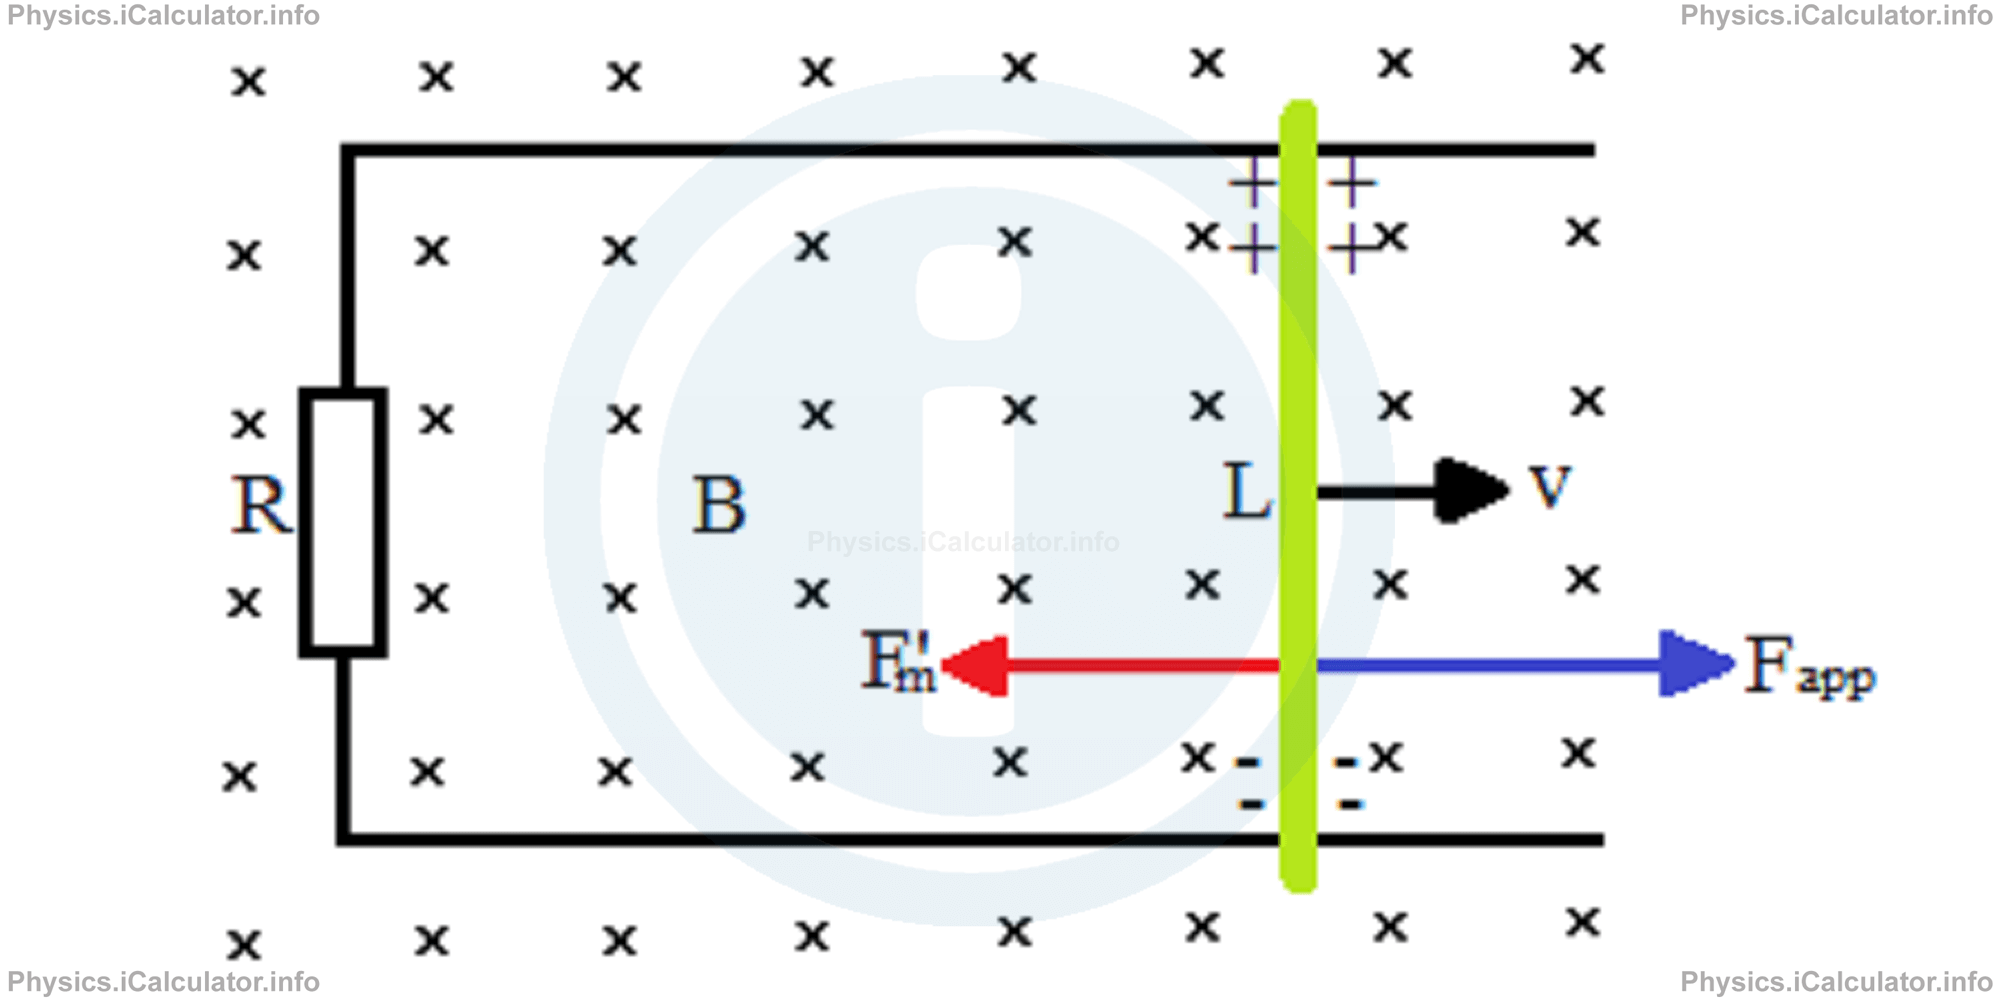 Physics Tutorials: This image provides visual information for the physics tutorial Faraday's Law of Induction 